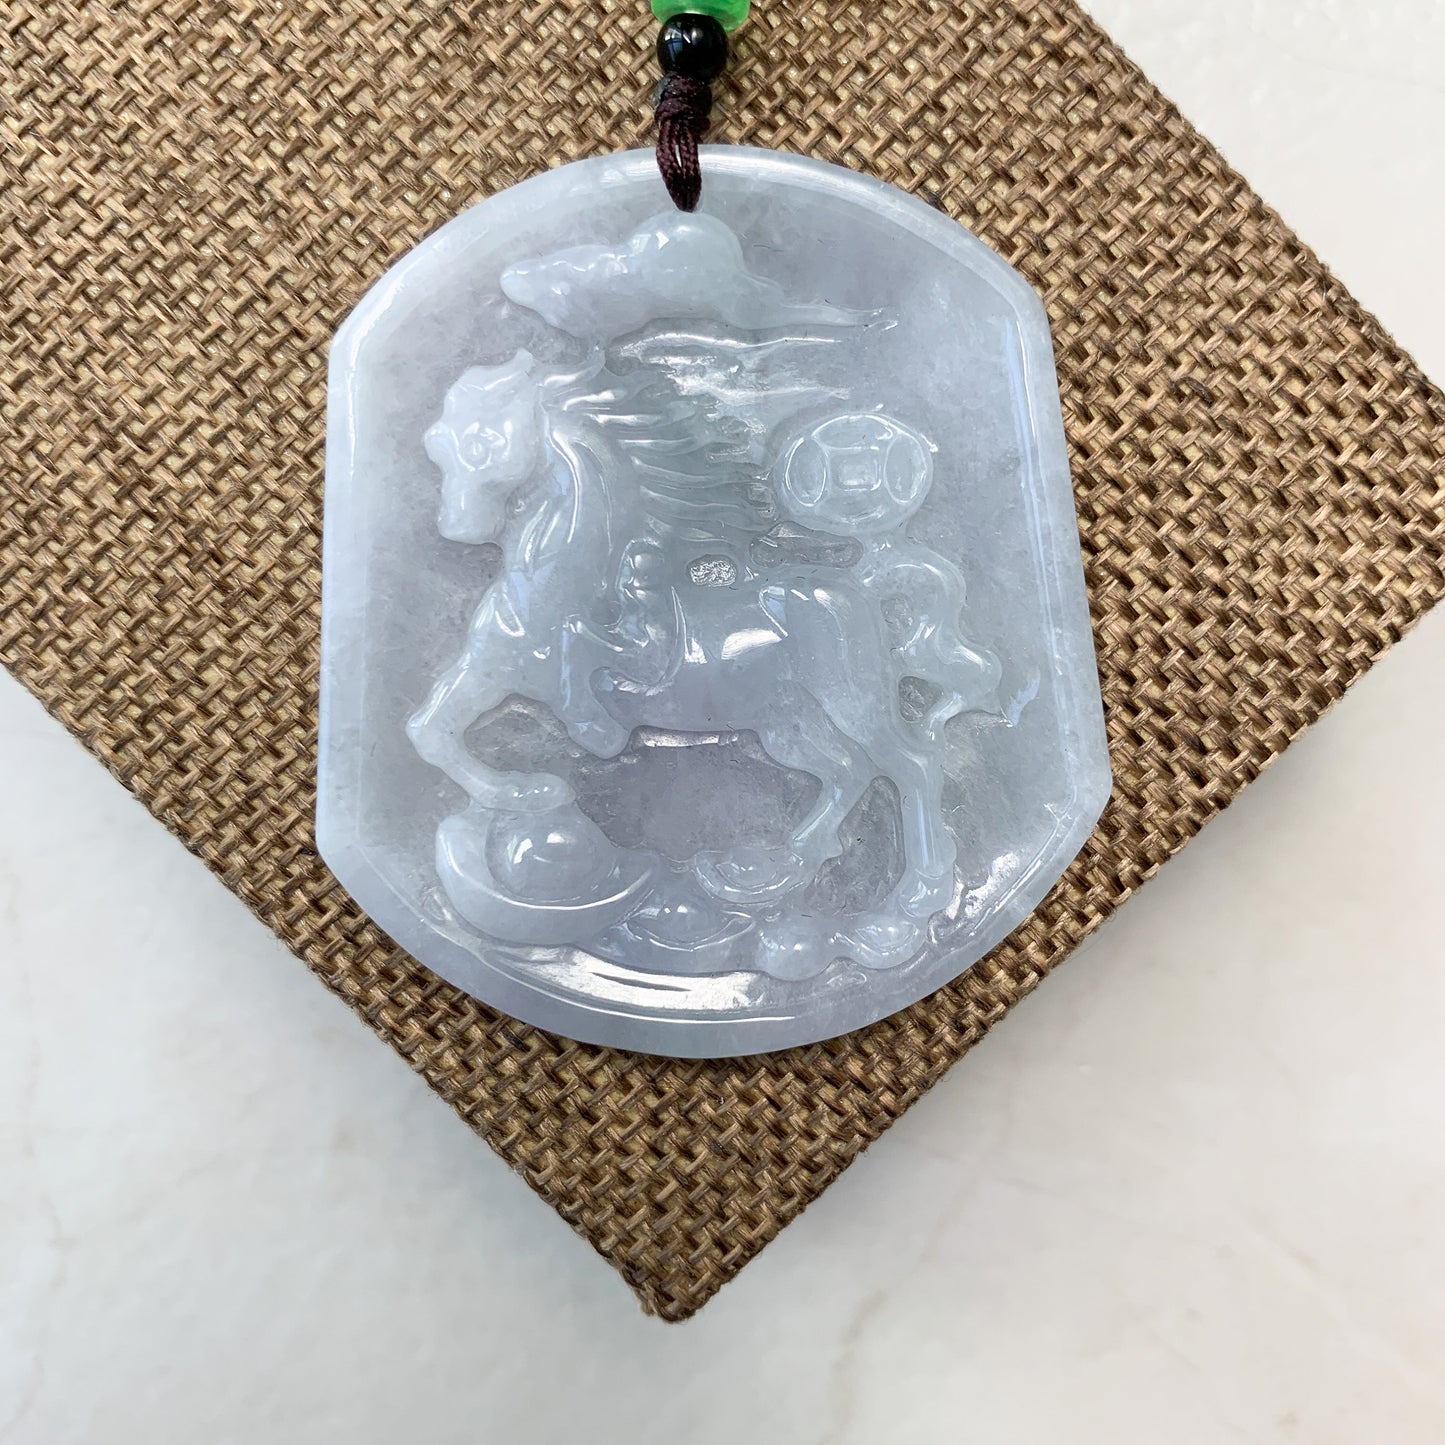 Large Horse Jade Jadeite Chinese Zodiac Carved Pendant Necklace, YJ-0321-0442959 - AriaDesignCollection